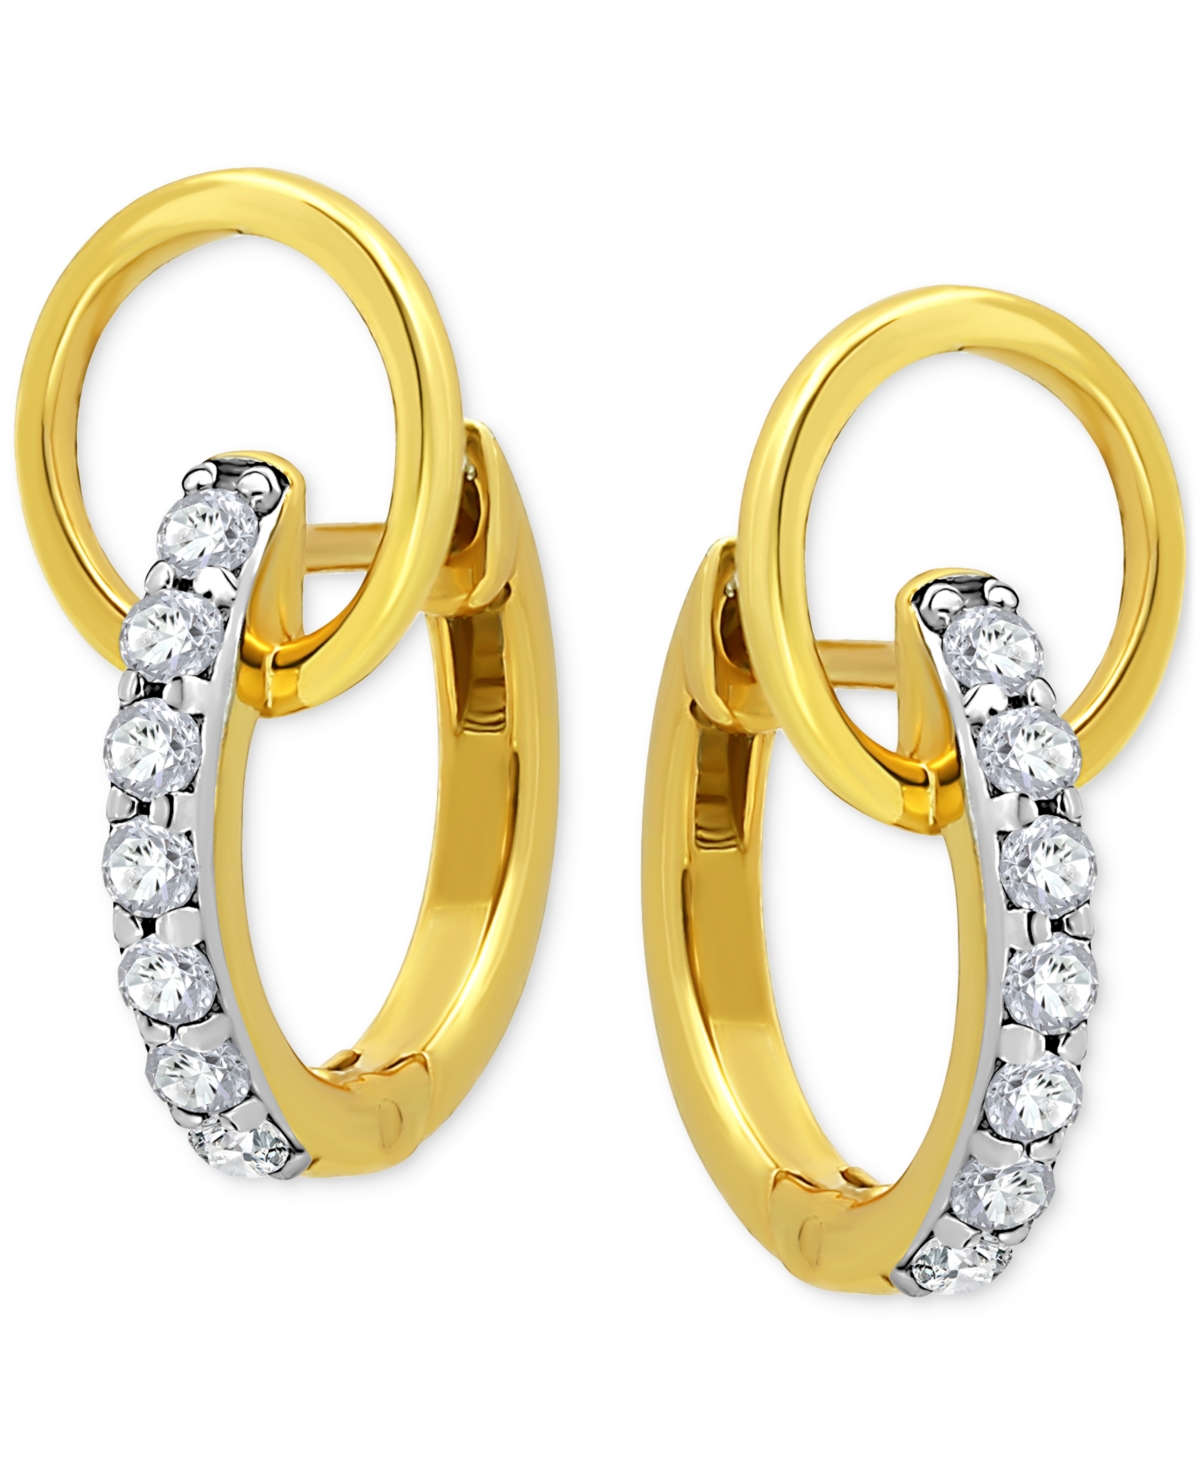 Giani Bernini Cubic Zirconia Interlocking Ring Hoop Earrings In 18k Gold-plated Sterling Silver, Created For Macy' In Twotone